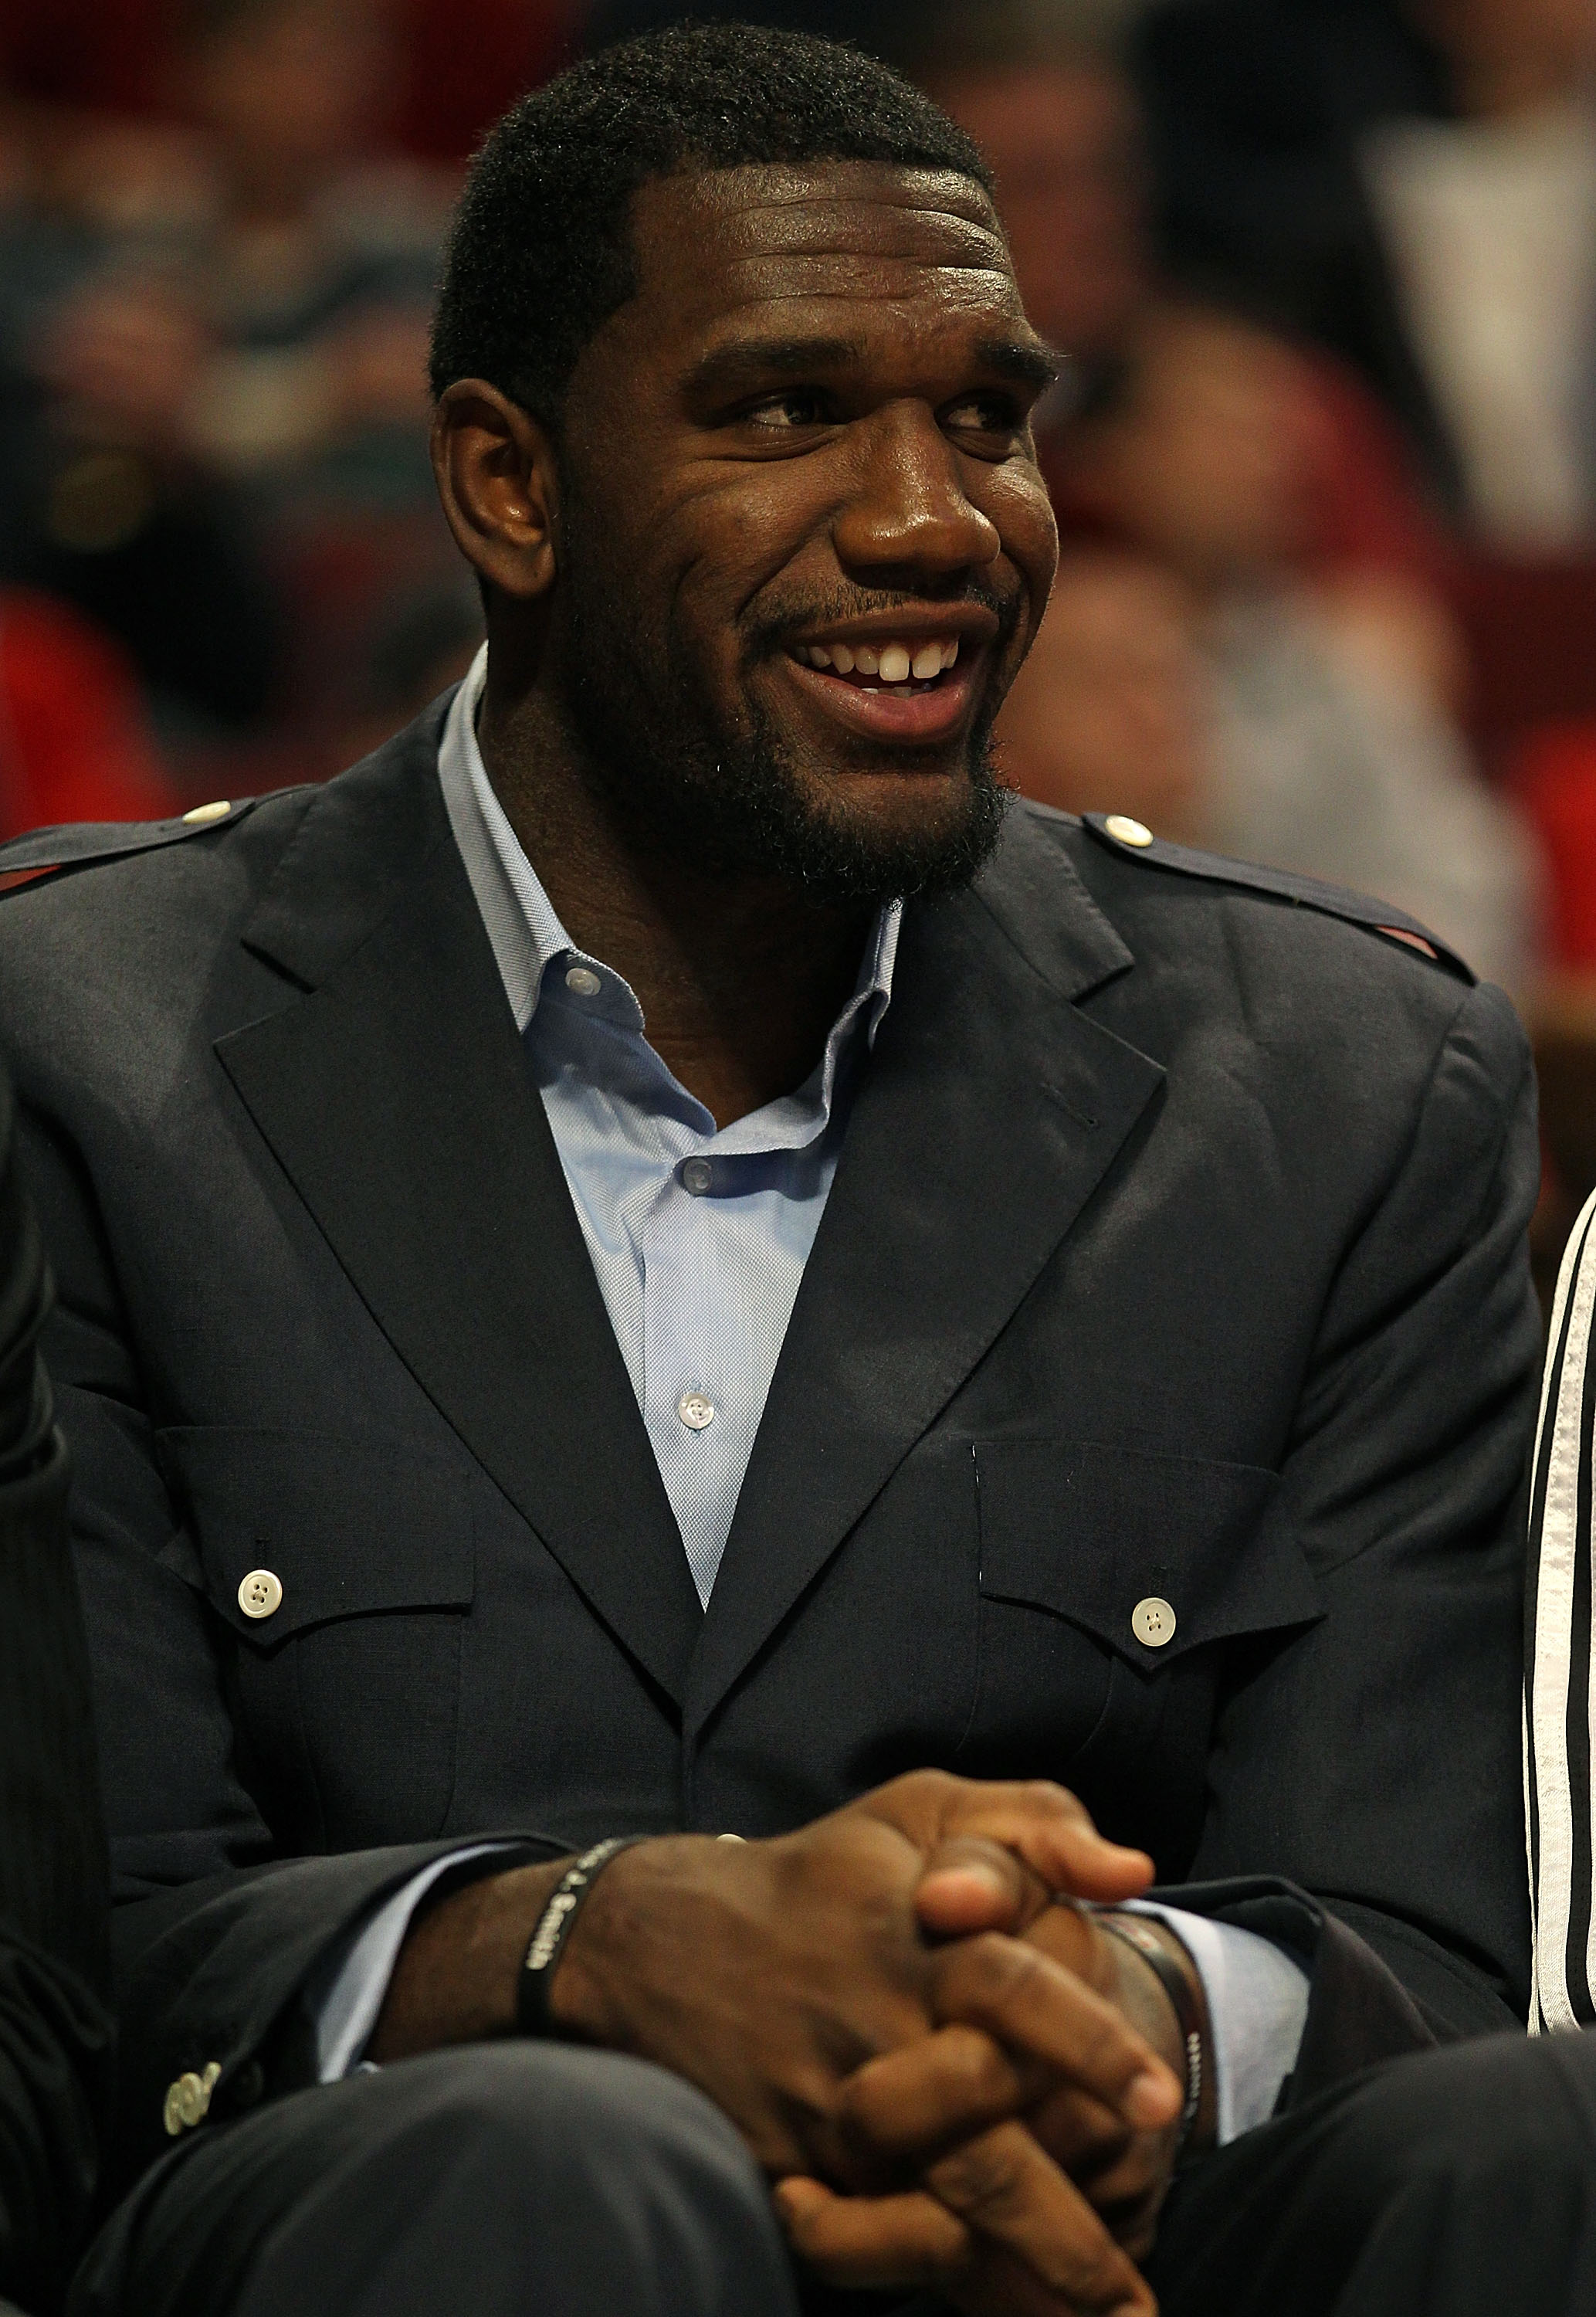 CHICAGO - NOVEMBER 01: Greg Oden #52 of the Portland Trail Blazers watches from the bench as his teammates take on the Chicago Bulls at the United Center on November 1, 2010 in Chicago, Illinois. The Bulls defeated the Trail Blazers 110-98. NOTE TO USER: